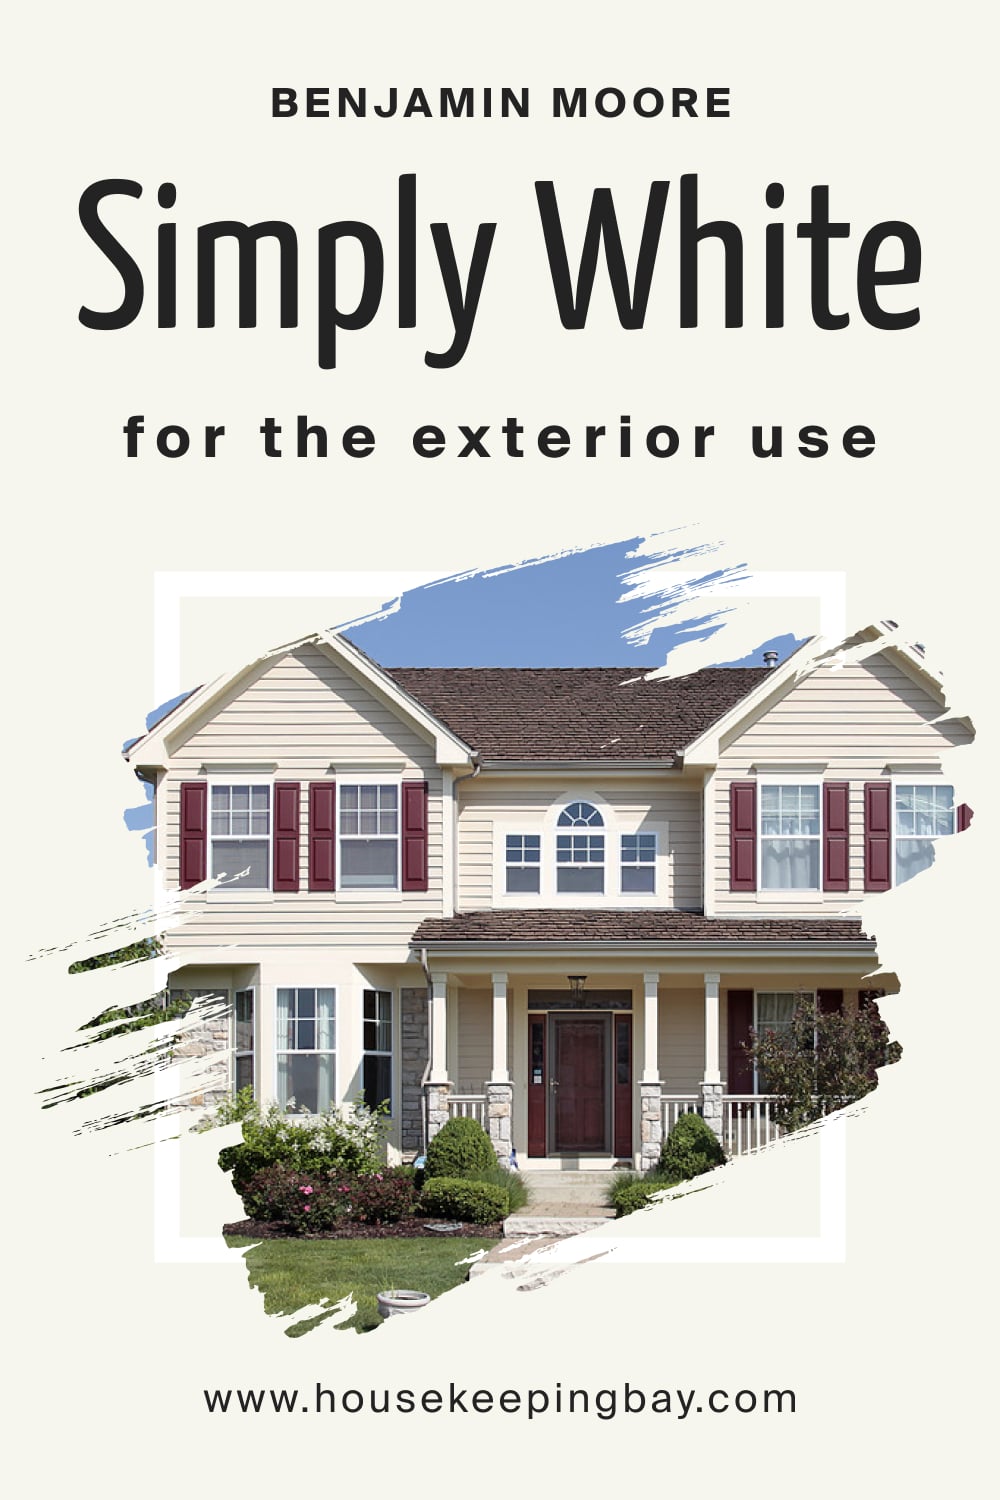 Benjamin Moore. Simply White OC 117 for the Exterior Use